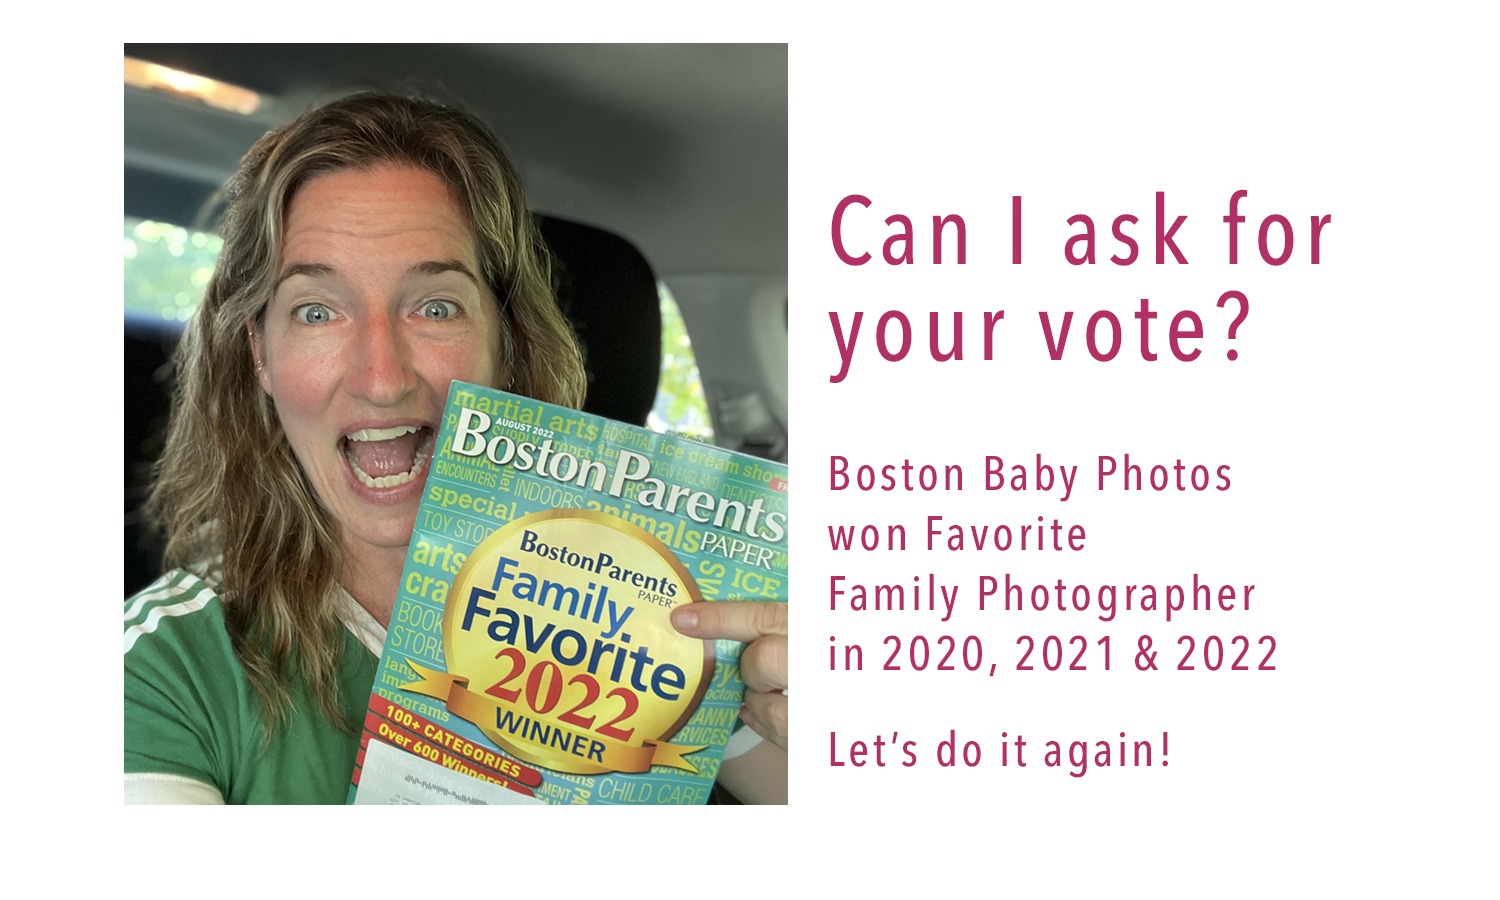 Best Family Photographer in Boston - Family Favorites Nominations Round!